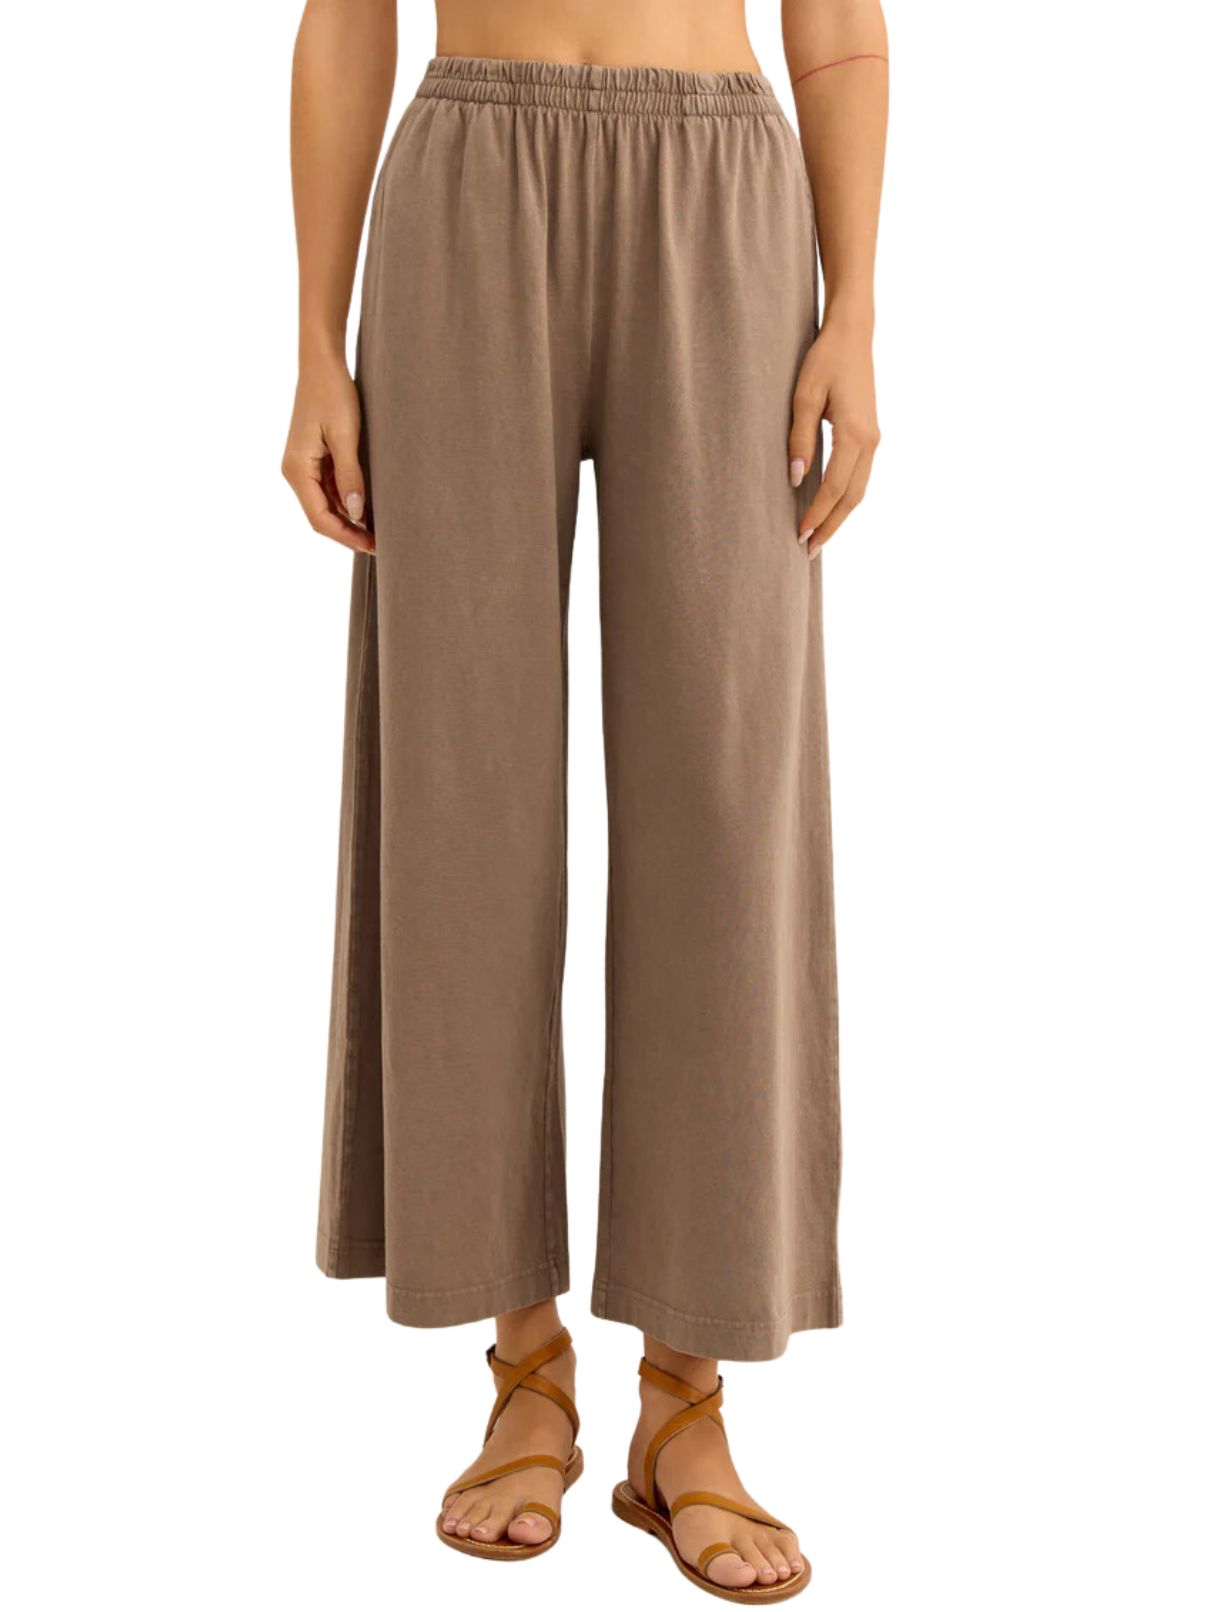 z supply scout jersey pant in iced coffee